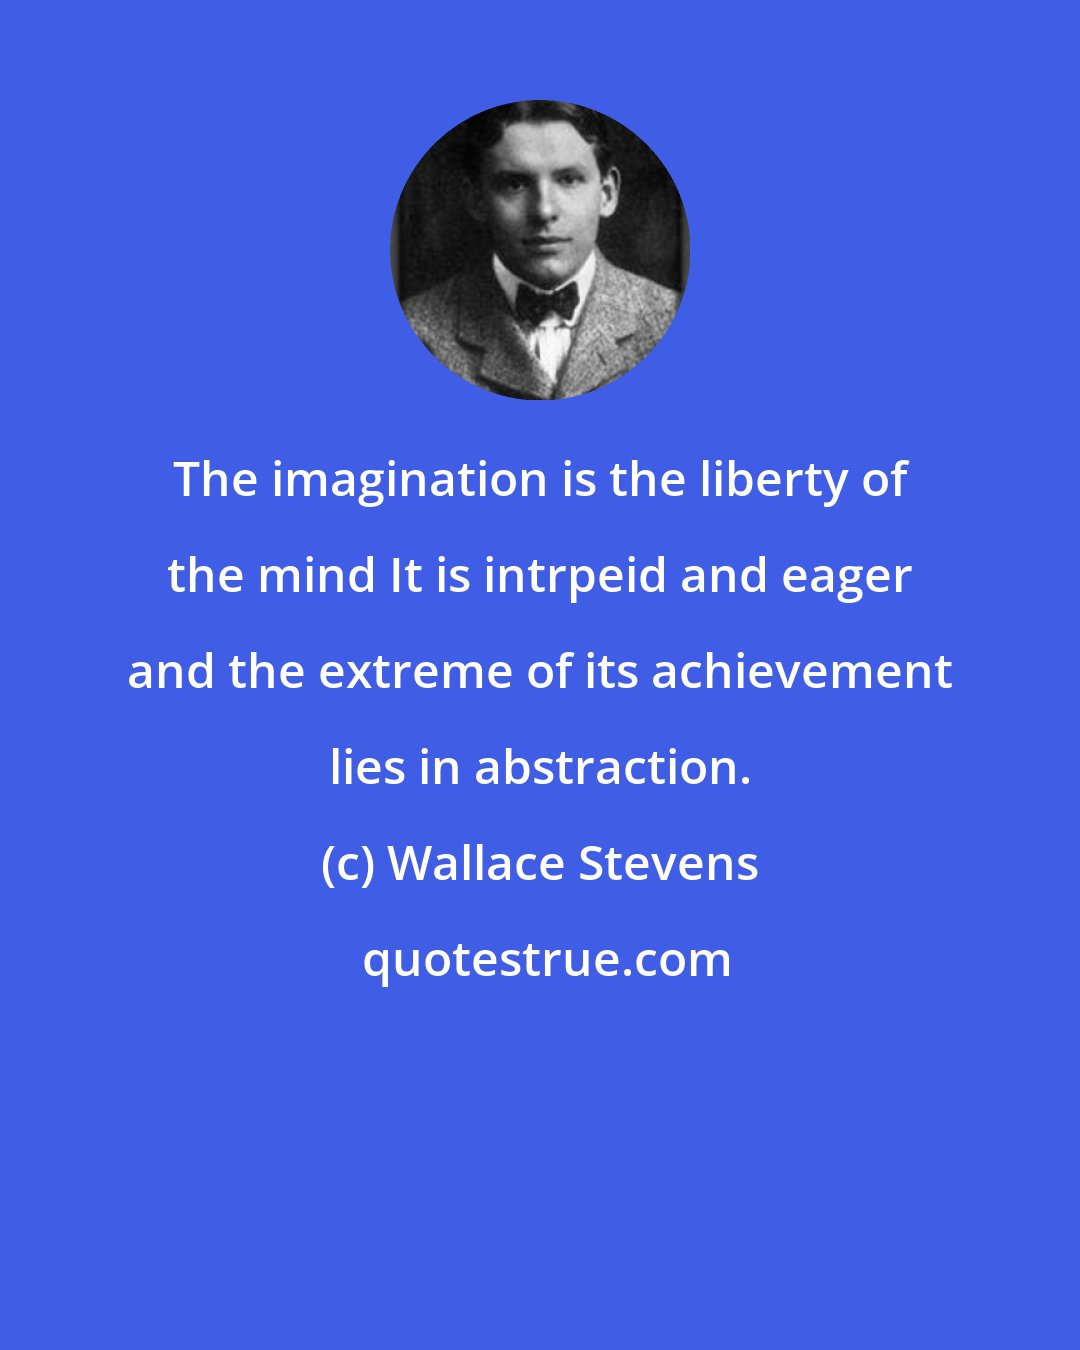 Wallace Stevens: The imagination is the liberty of the mind It is intrpeid and eager and the extreme of its achievement lies in abstraction.